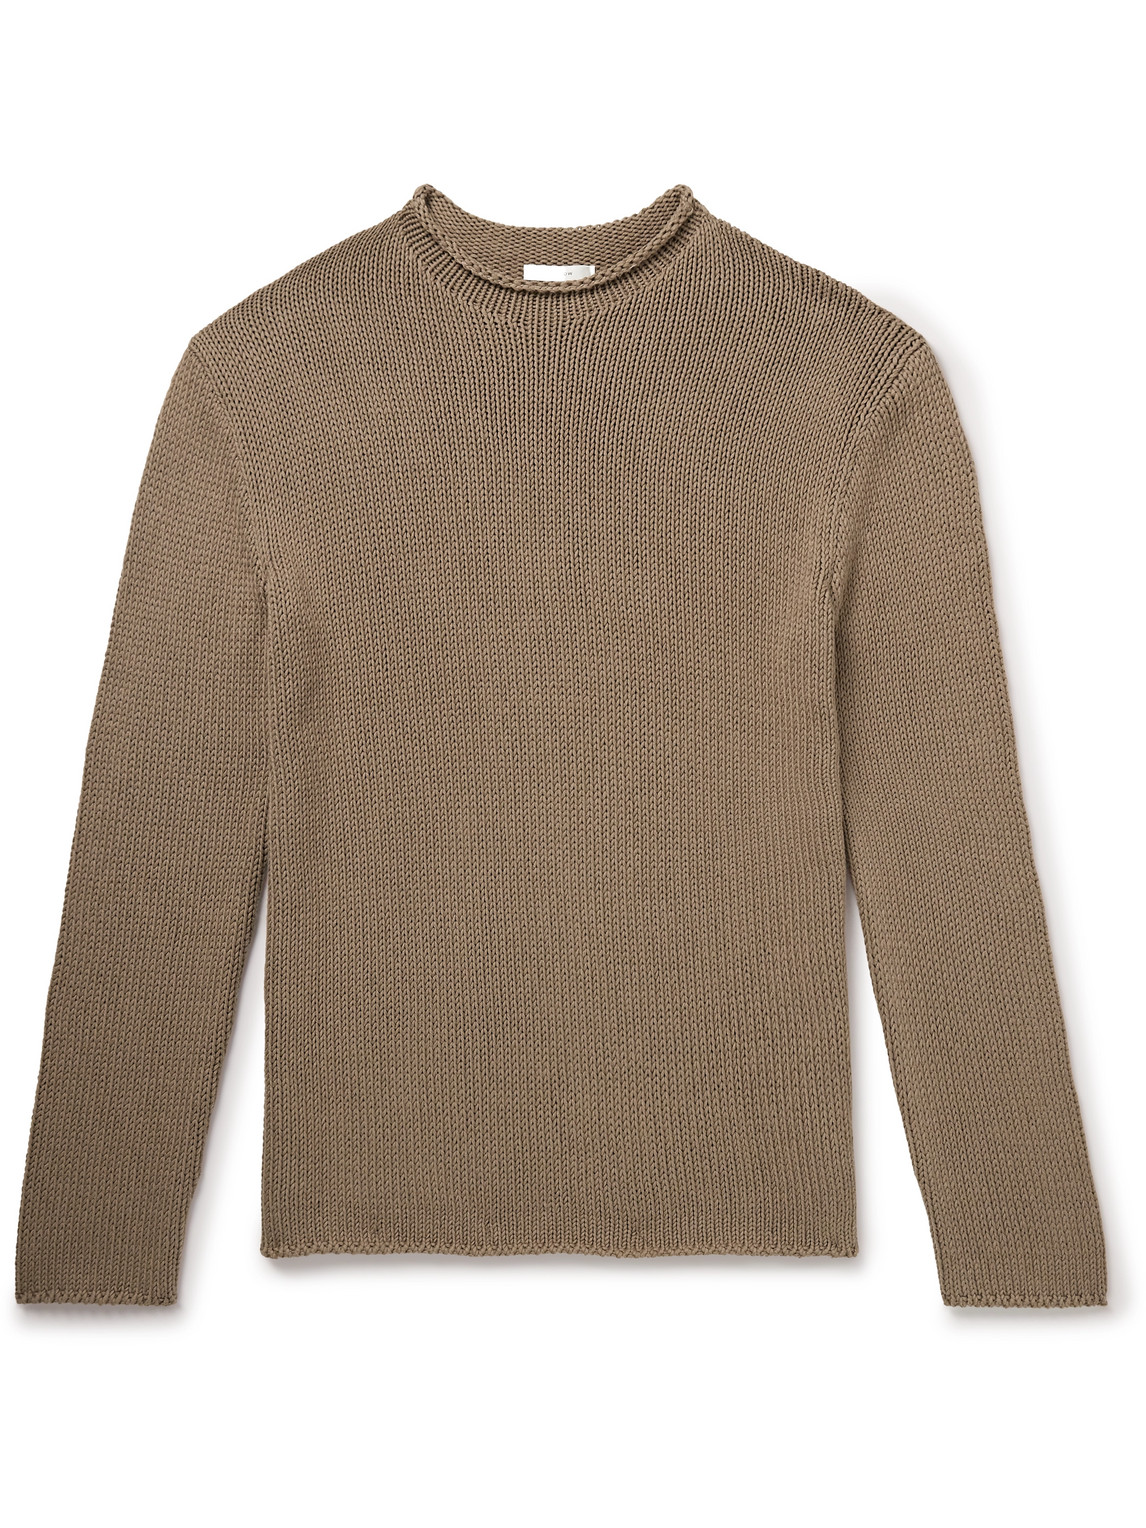 Anteo Cotton and Cashmere-Blend Sweater